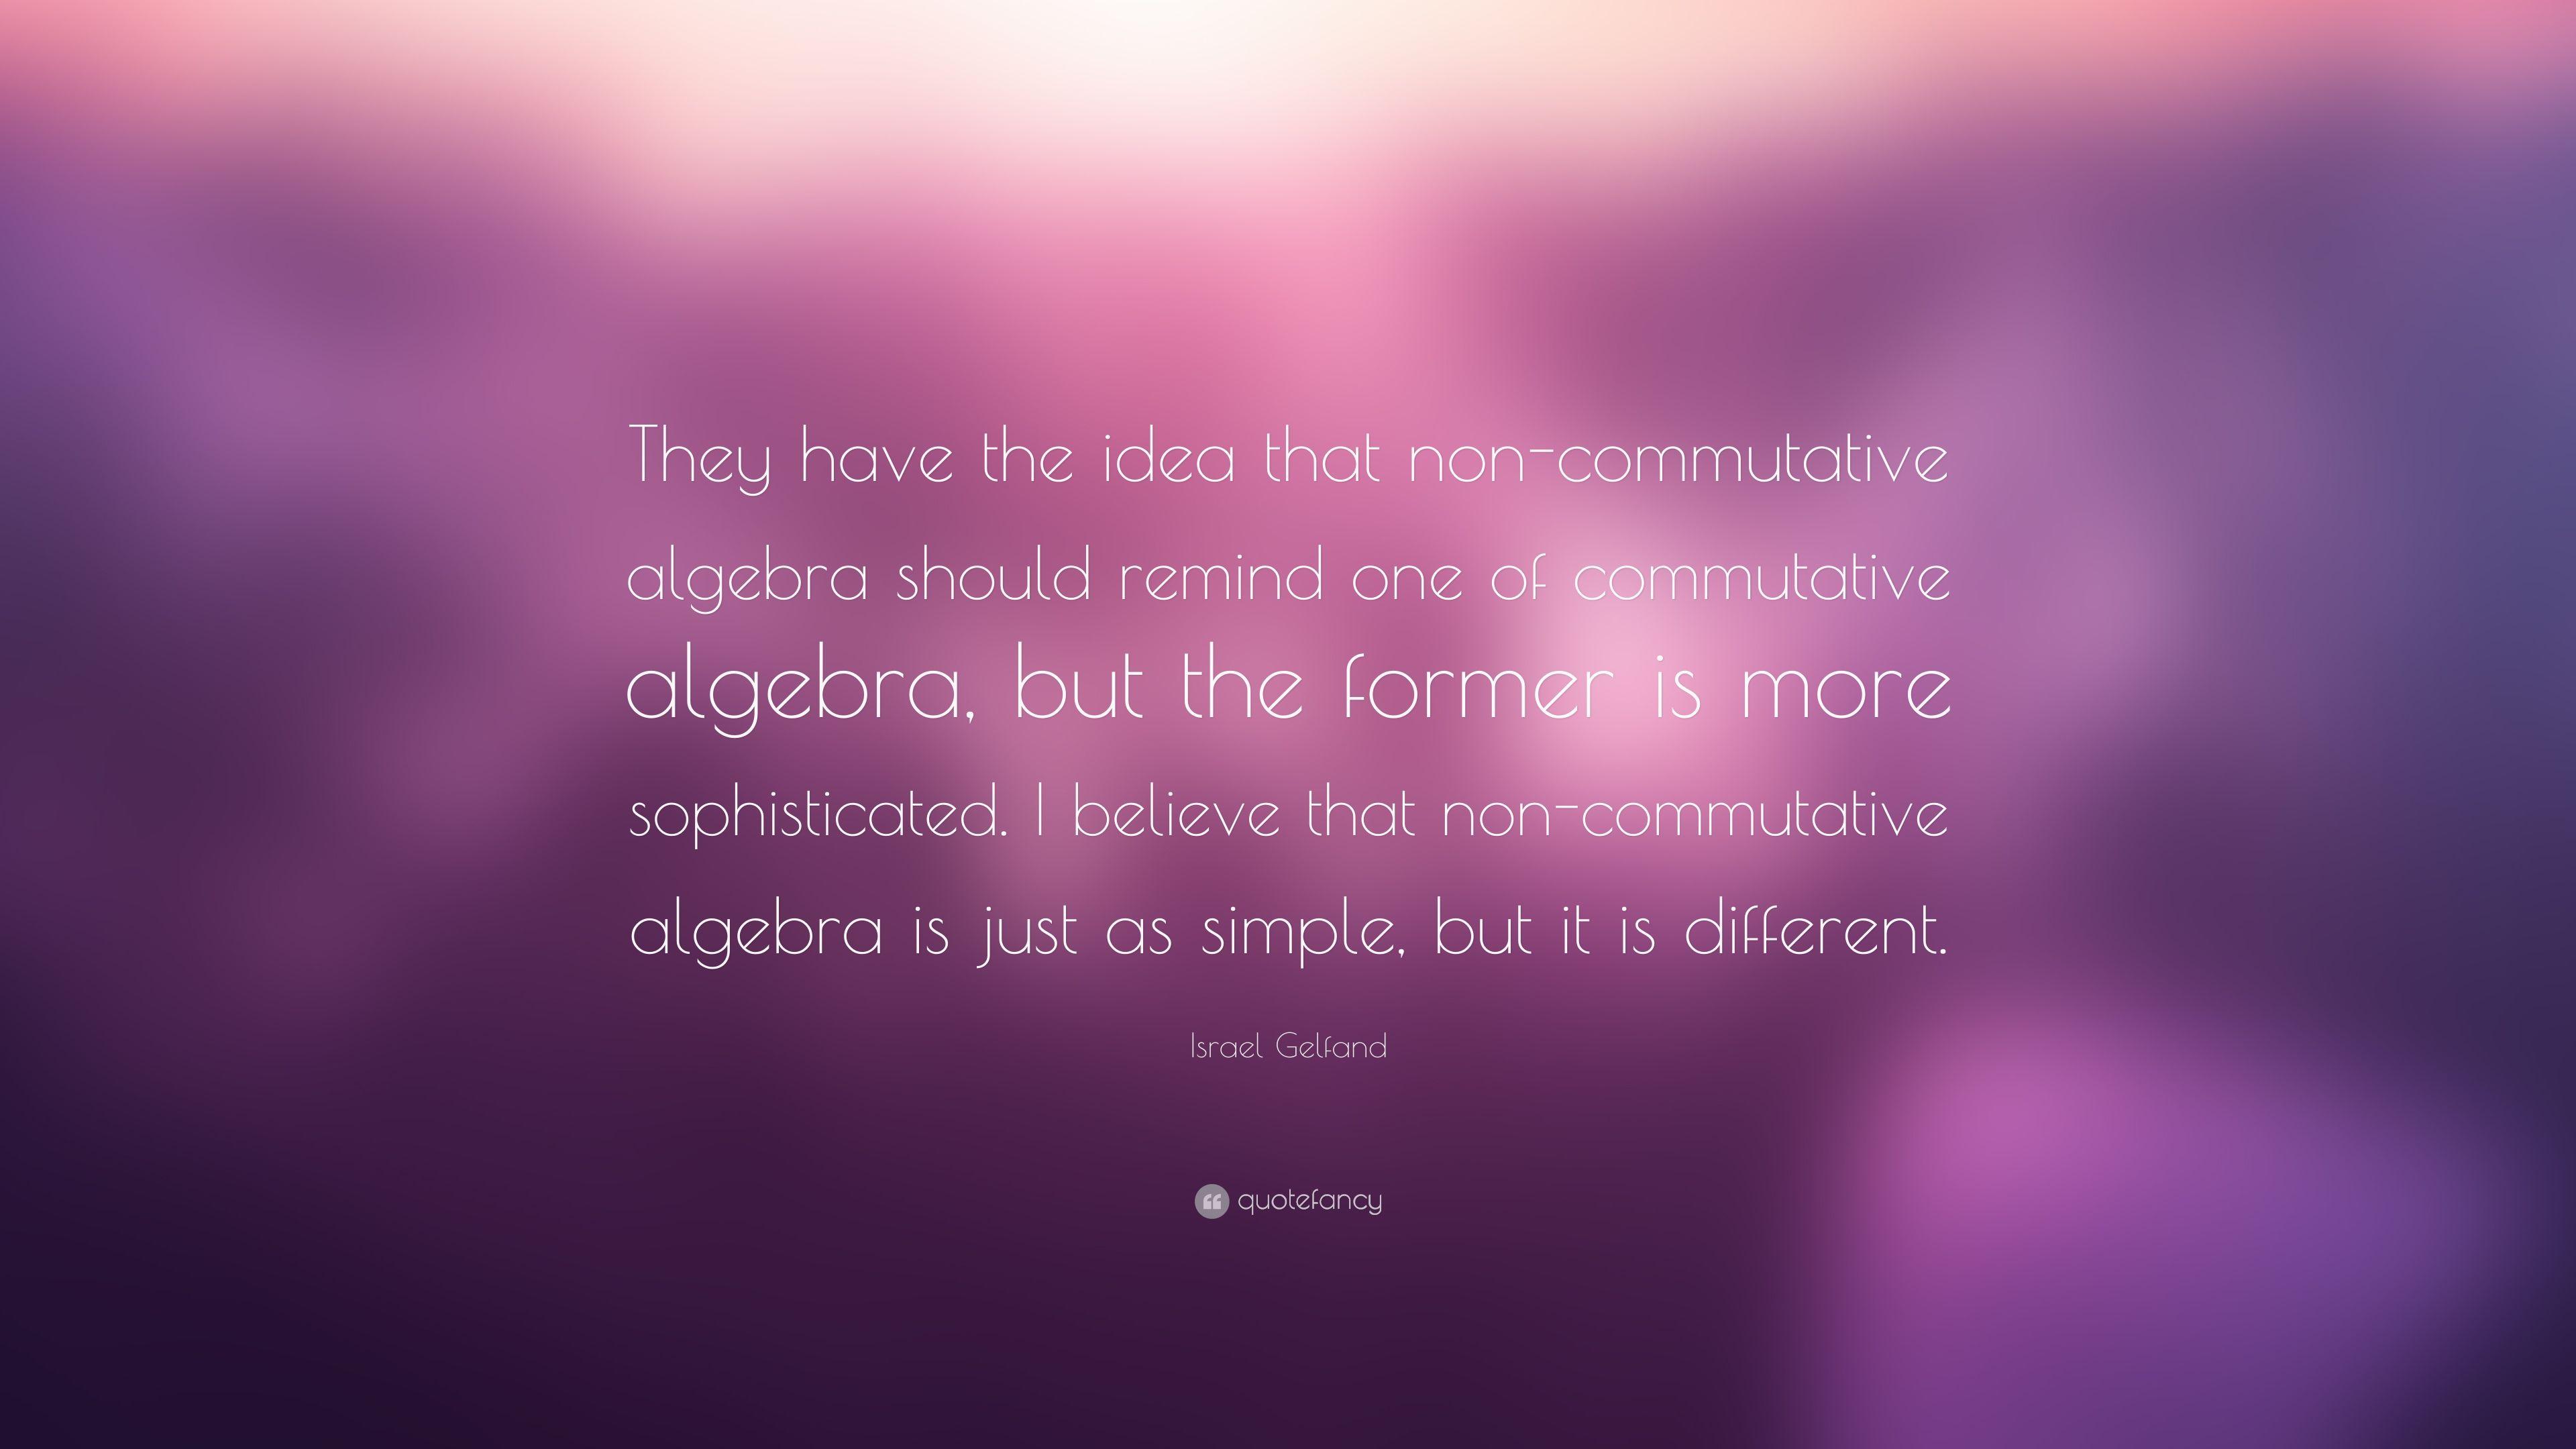 Israel Gelfand Quote: “They Have The Idea That Non Commutative